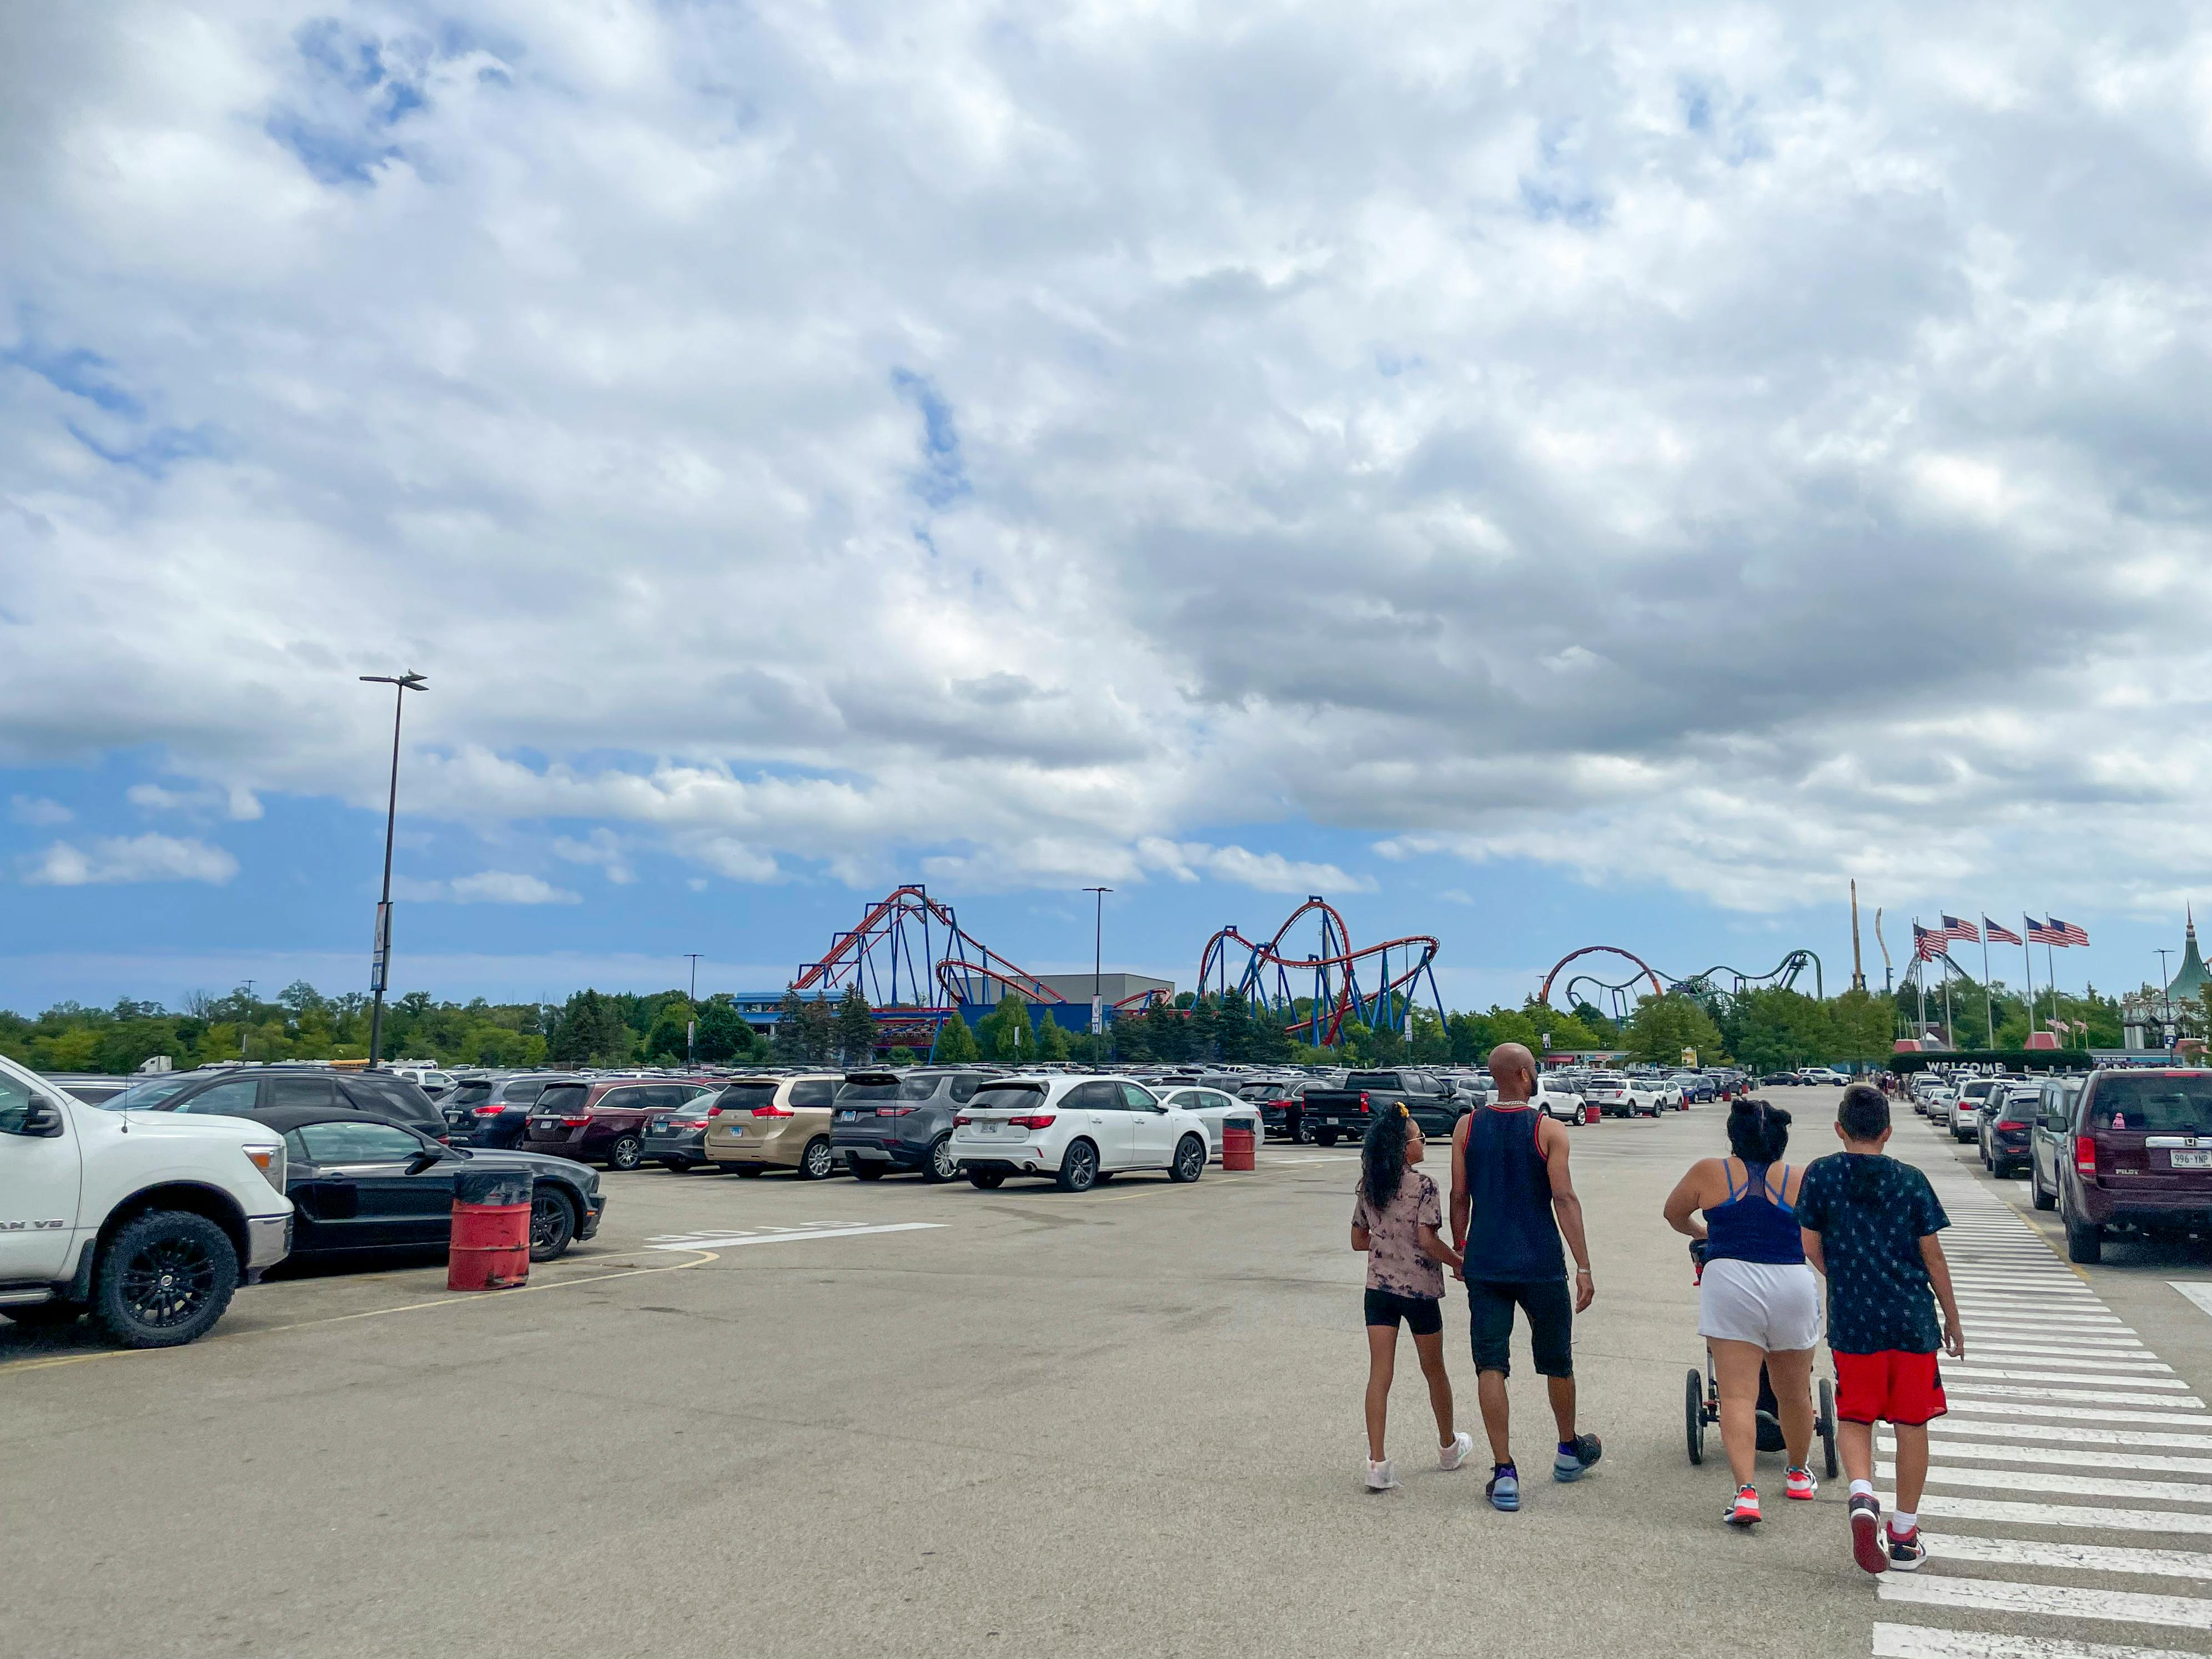 A group of people in a Six Flags amusement park parking lot walking towards the park